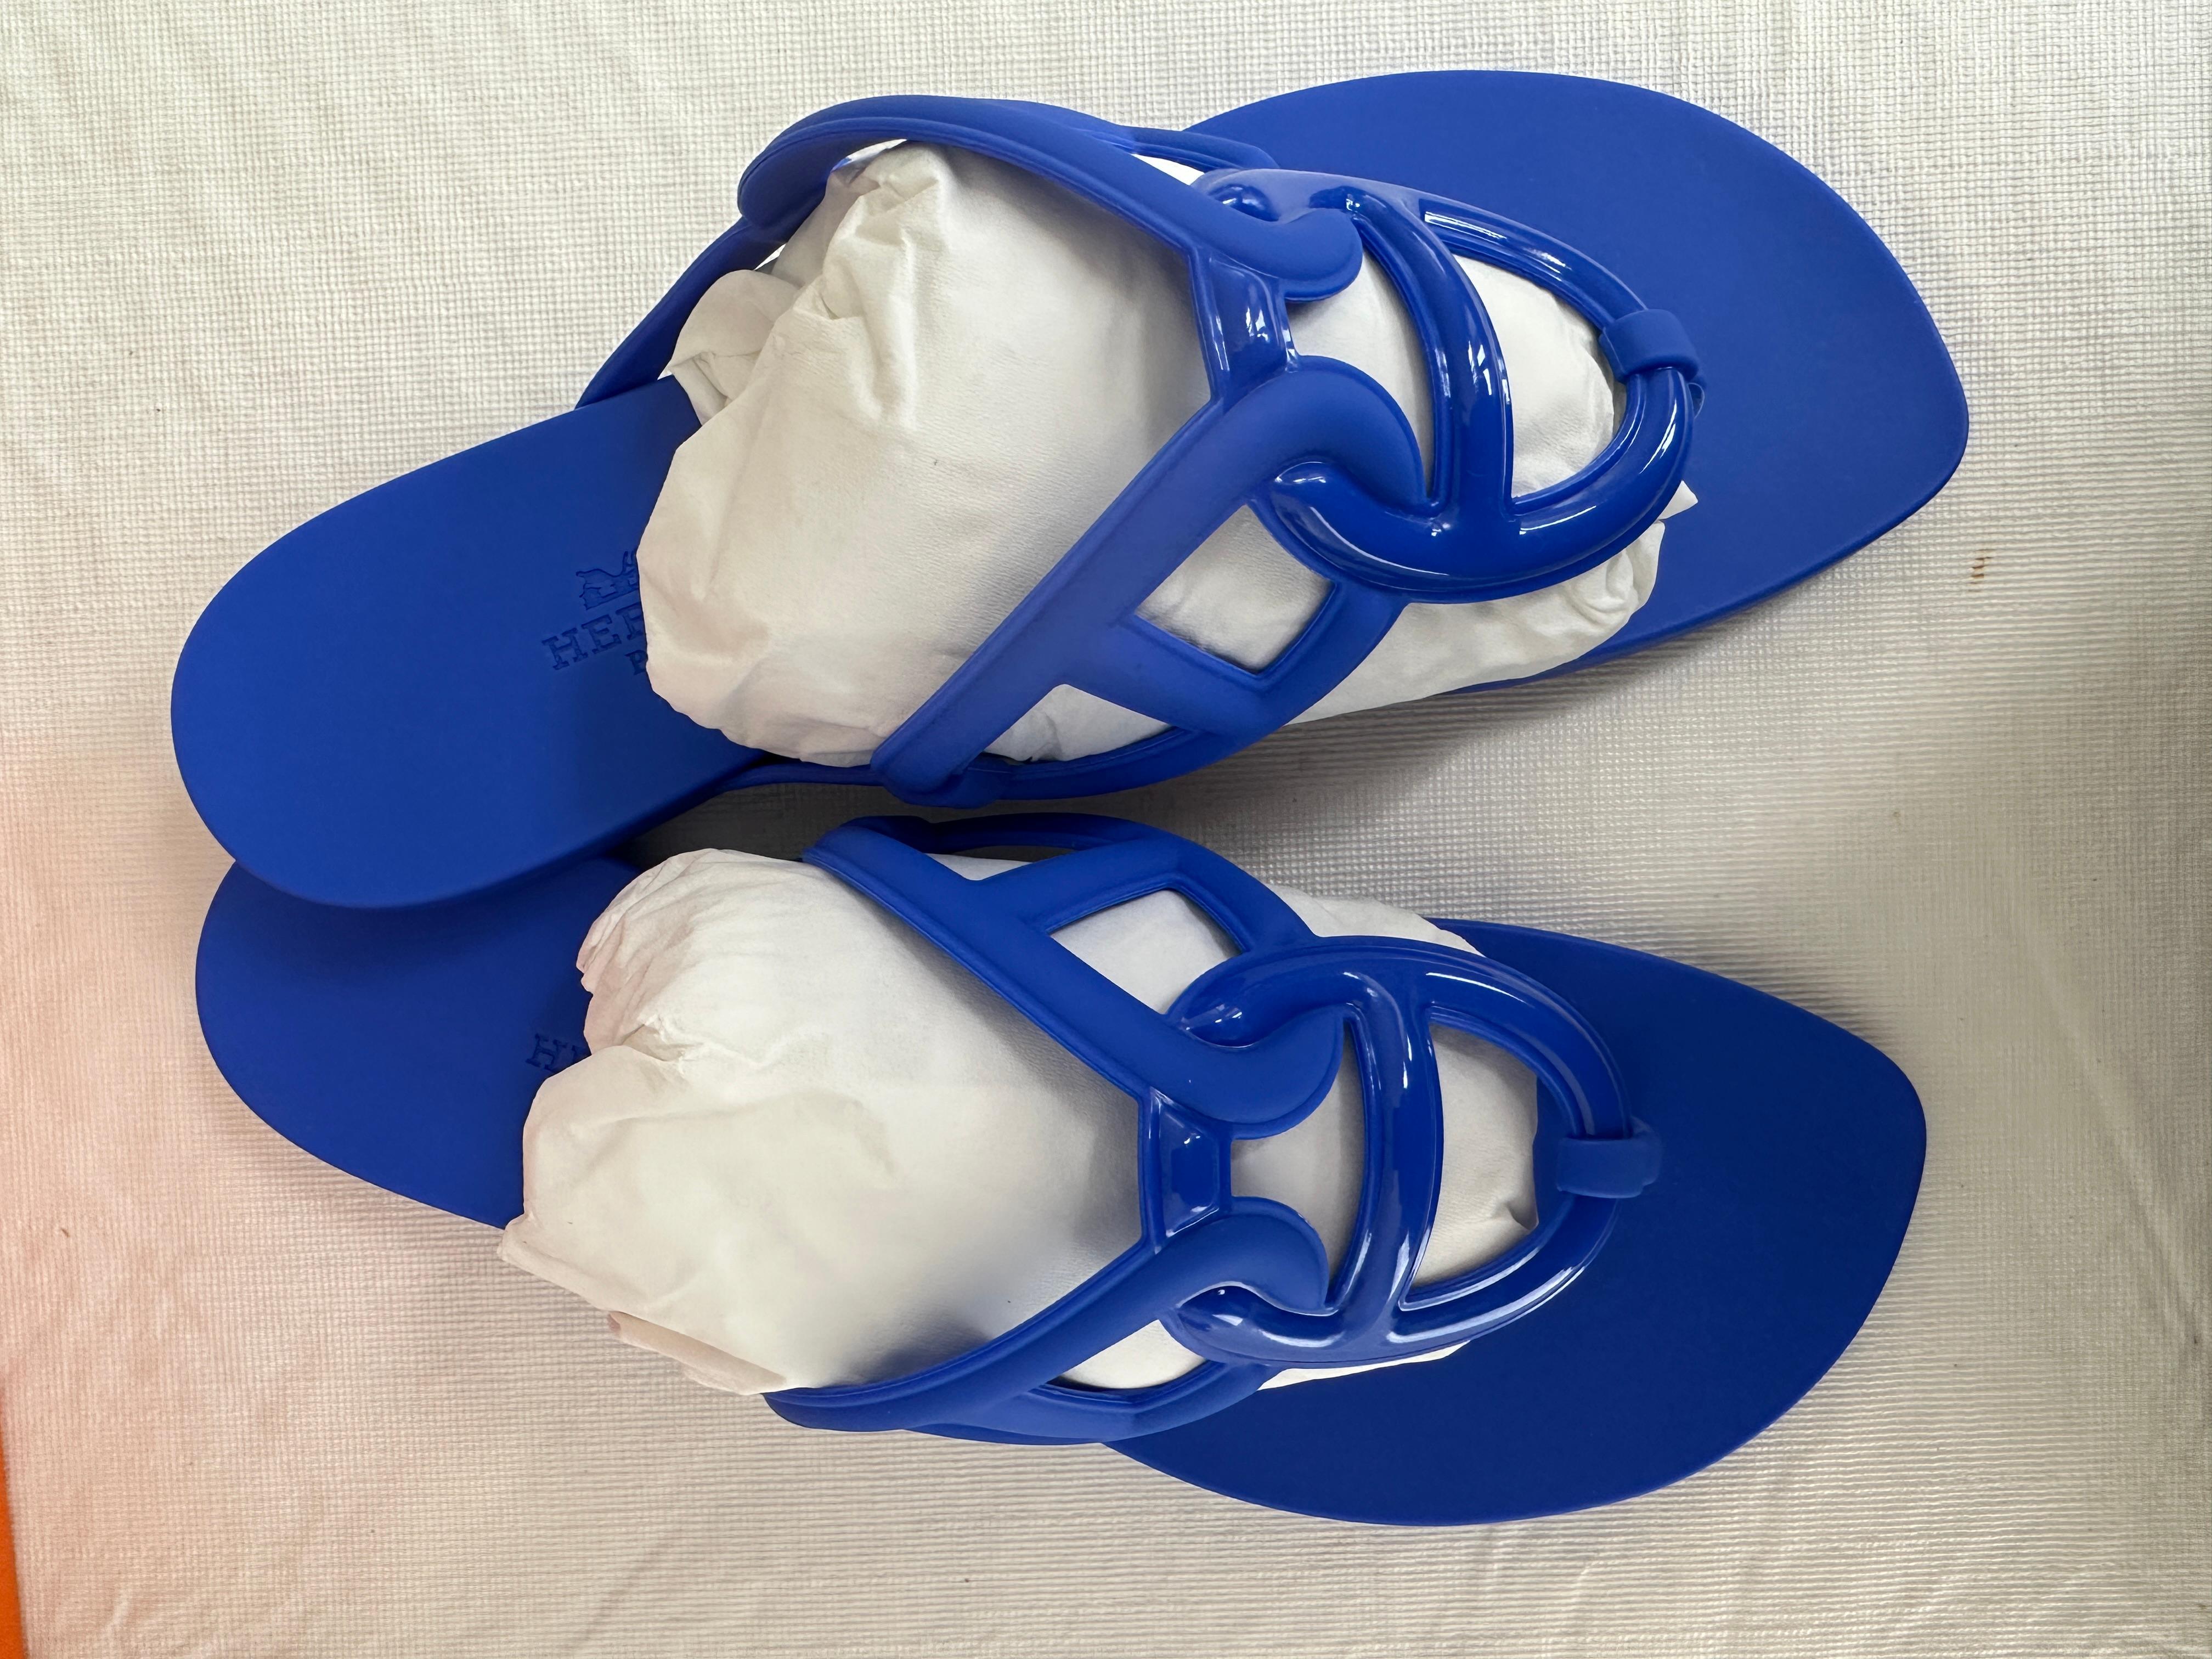 New HERMES Egerie Sandals Bleu Outremer Chaine d'Ancre Motif Sandal 35 In New Condition For Sale In West Chester, PA